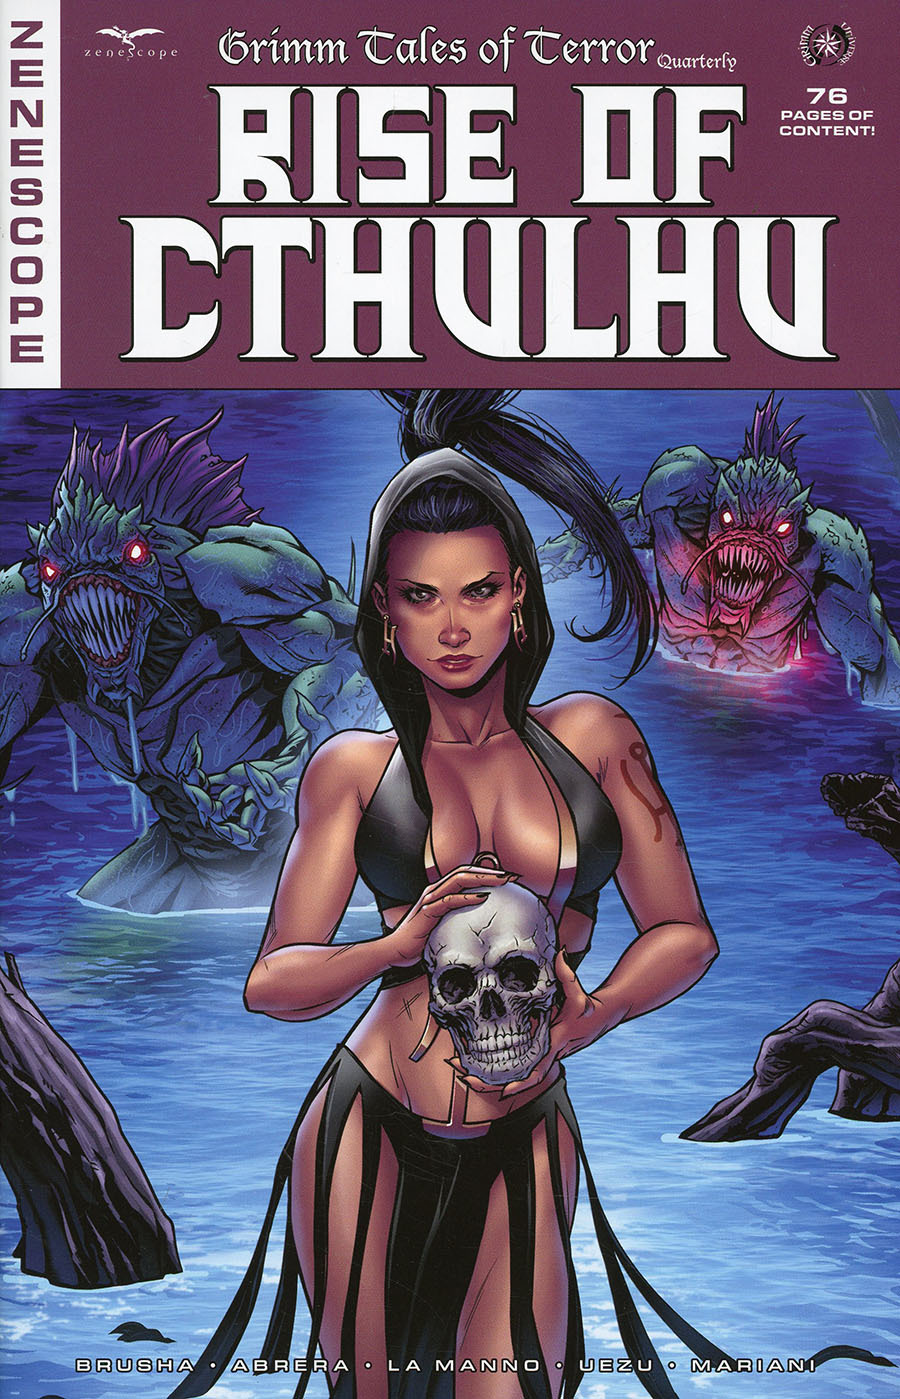 Grimm Fairy Tales Presents Grimm Tales Of Terror Quarterly #7 Rise Of Cthulhu Cover C Riveiro